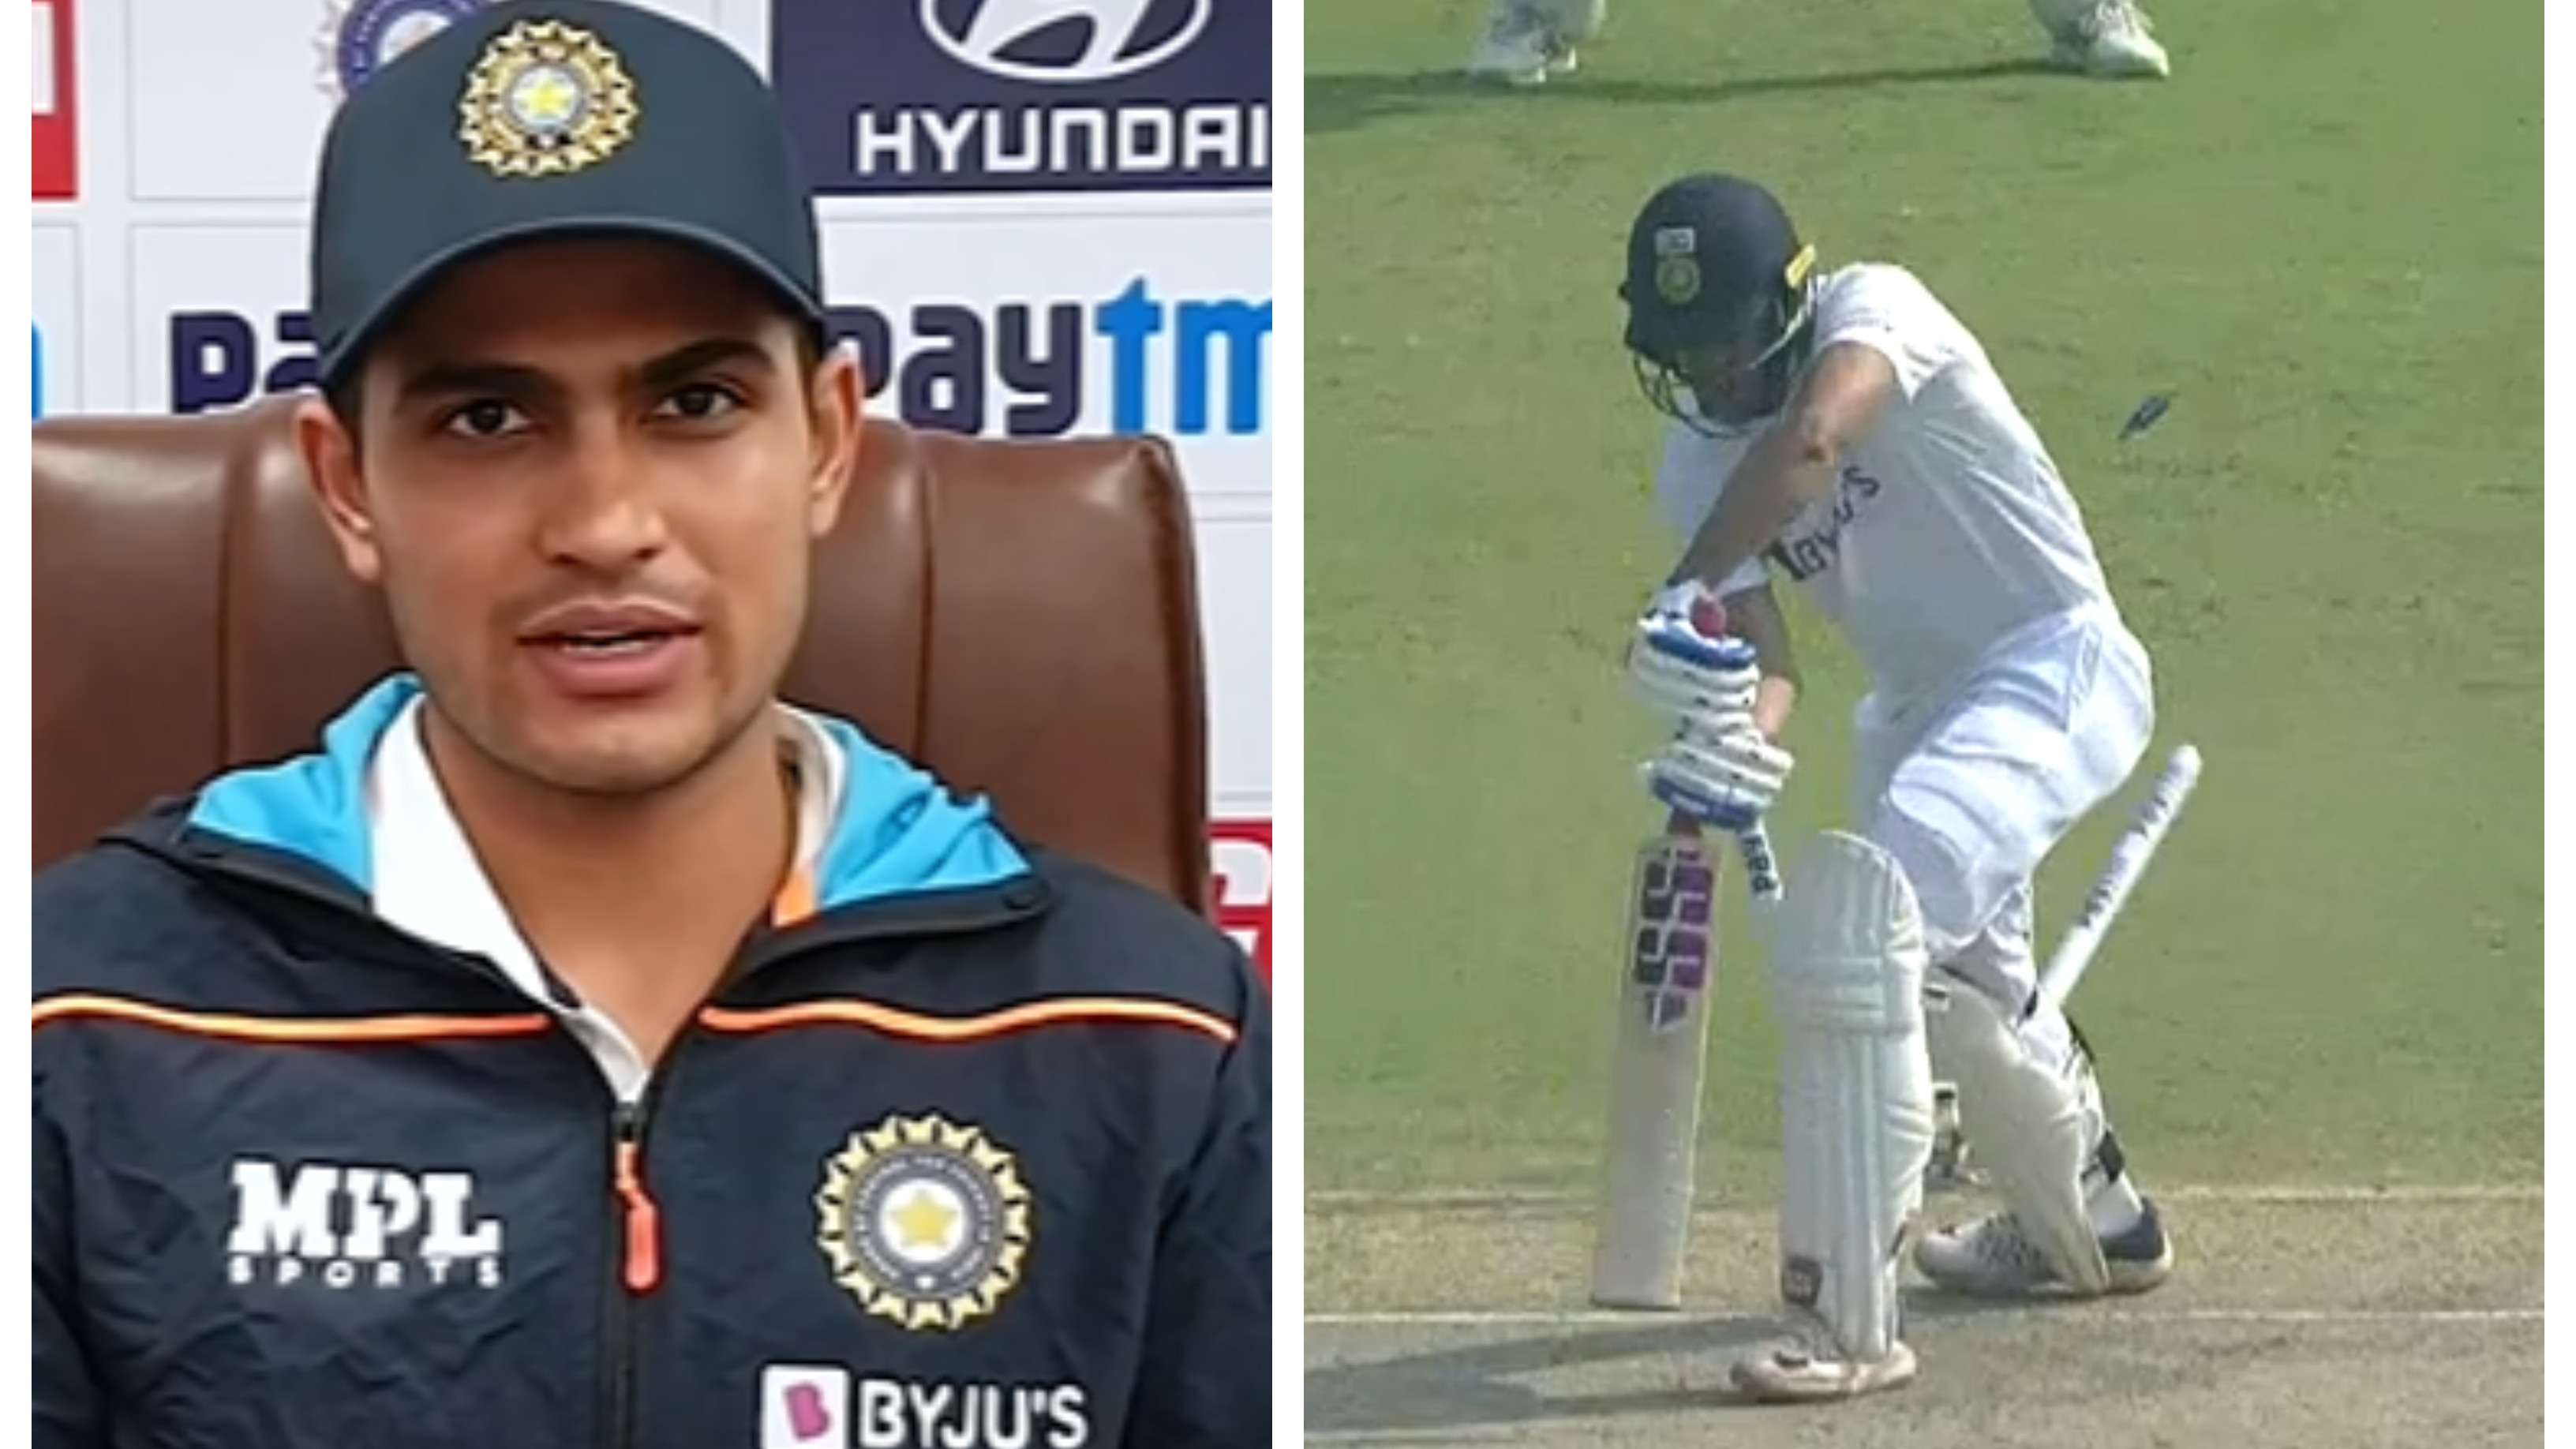 IND v NZ 2021: “Didn’t expect the ball to reverse that early”, Shubman Gill reflects on his dismissal on Day 1